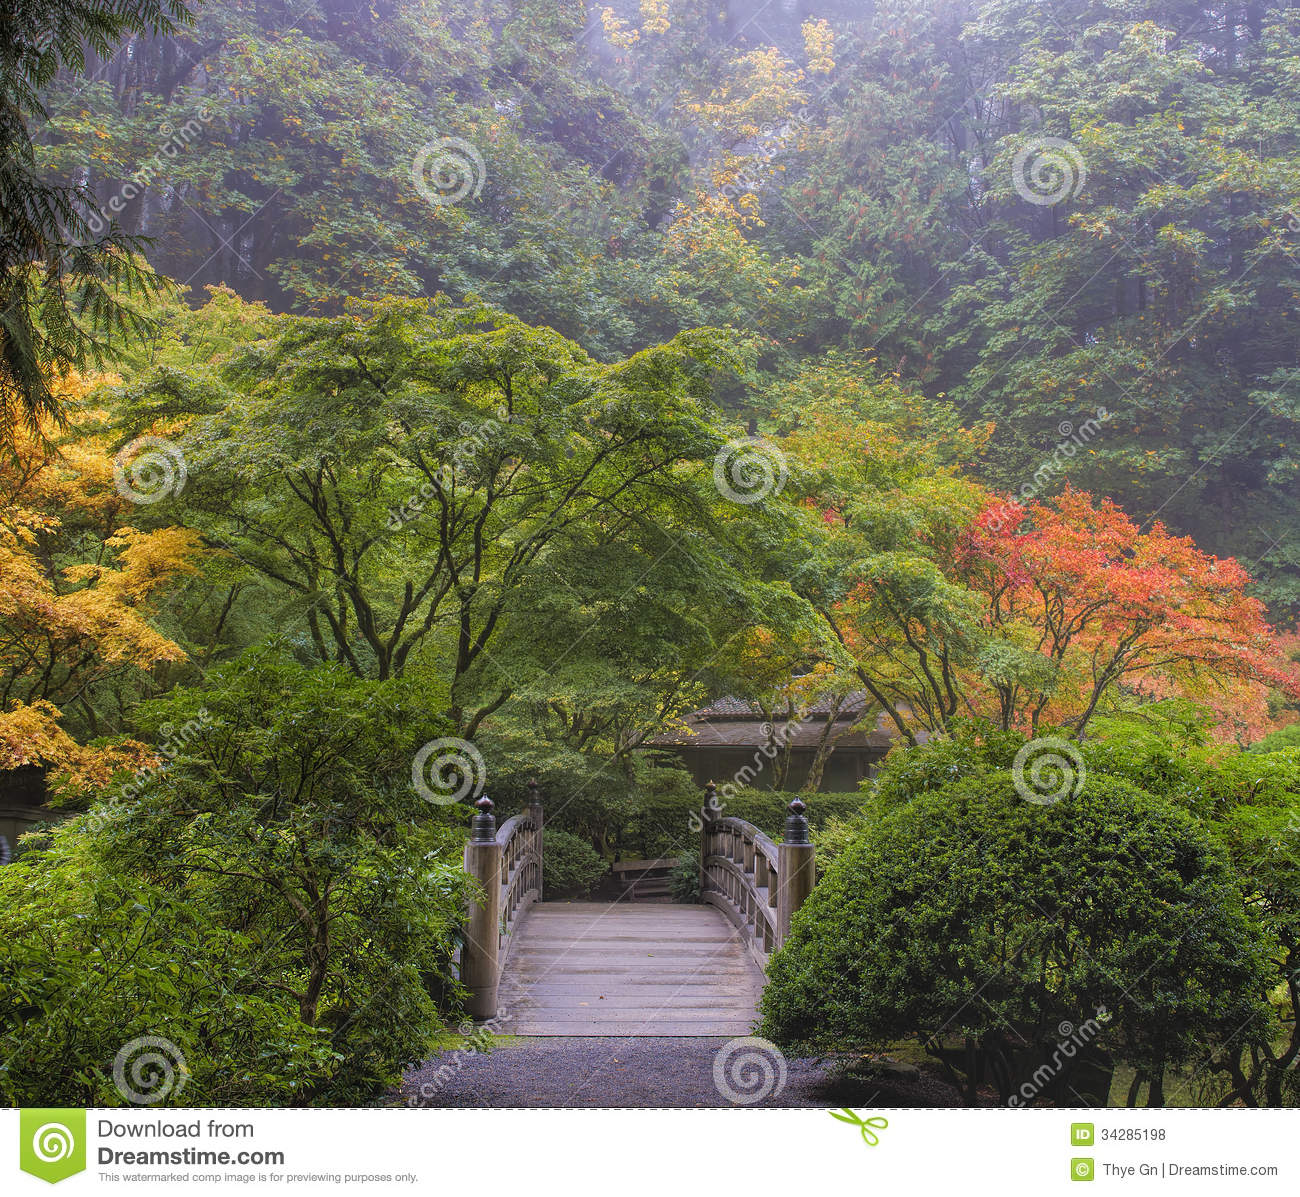 Foggy Morning In Japanese Garden With Wooden Foot Bridge During Fall